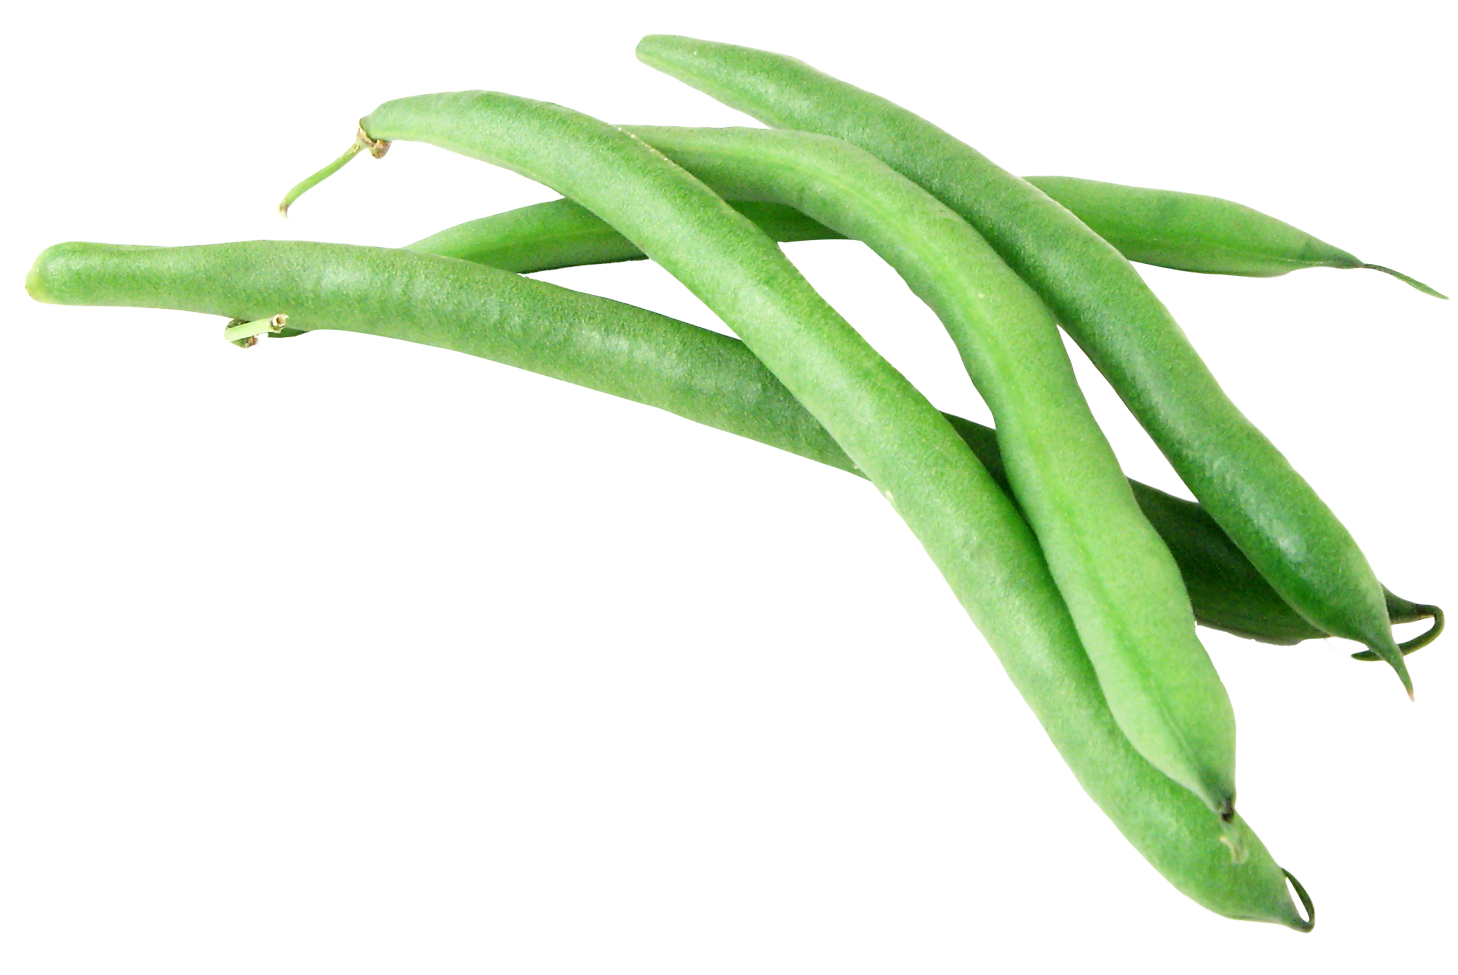 Peas clipart runner bean. Green png images free